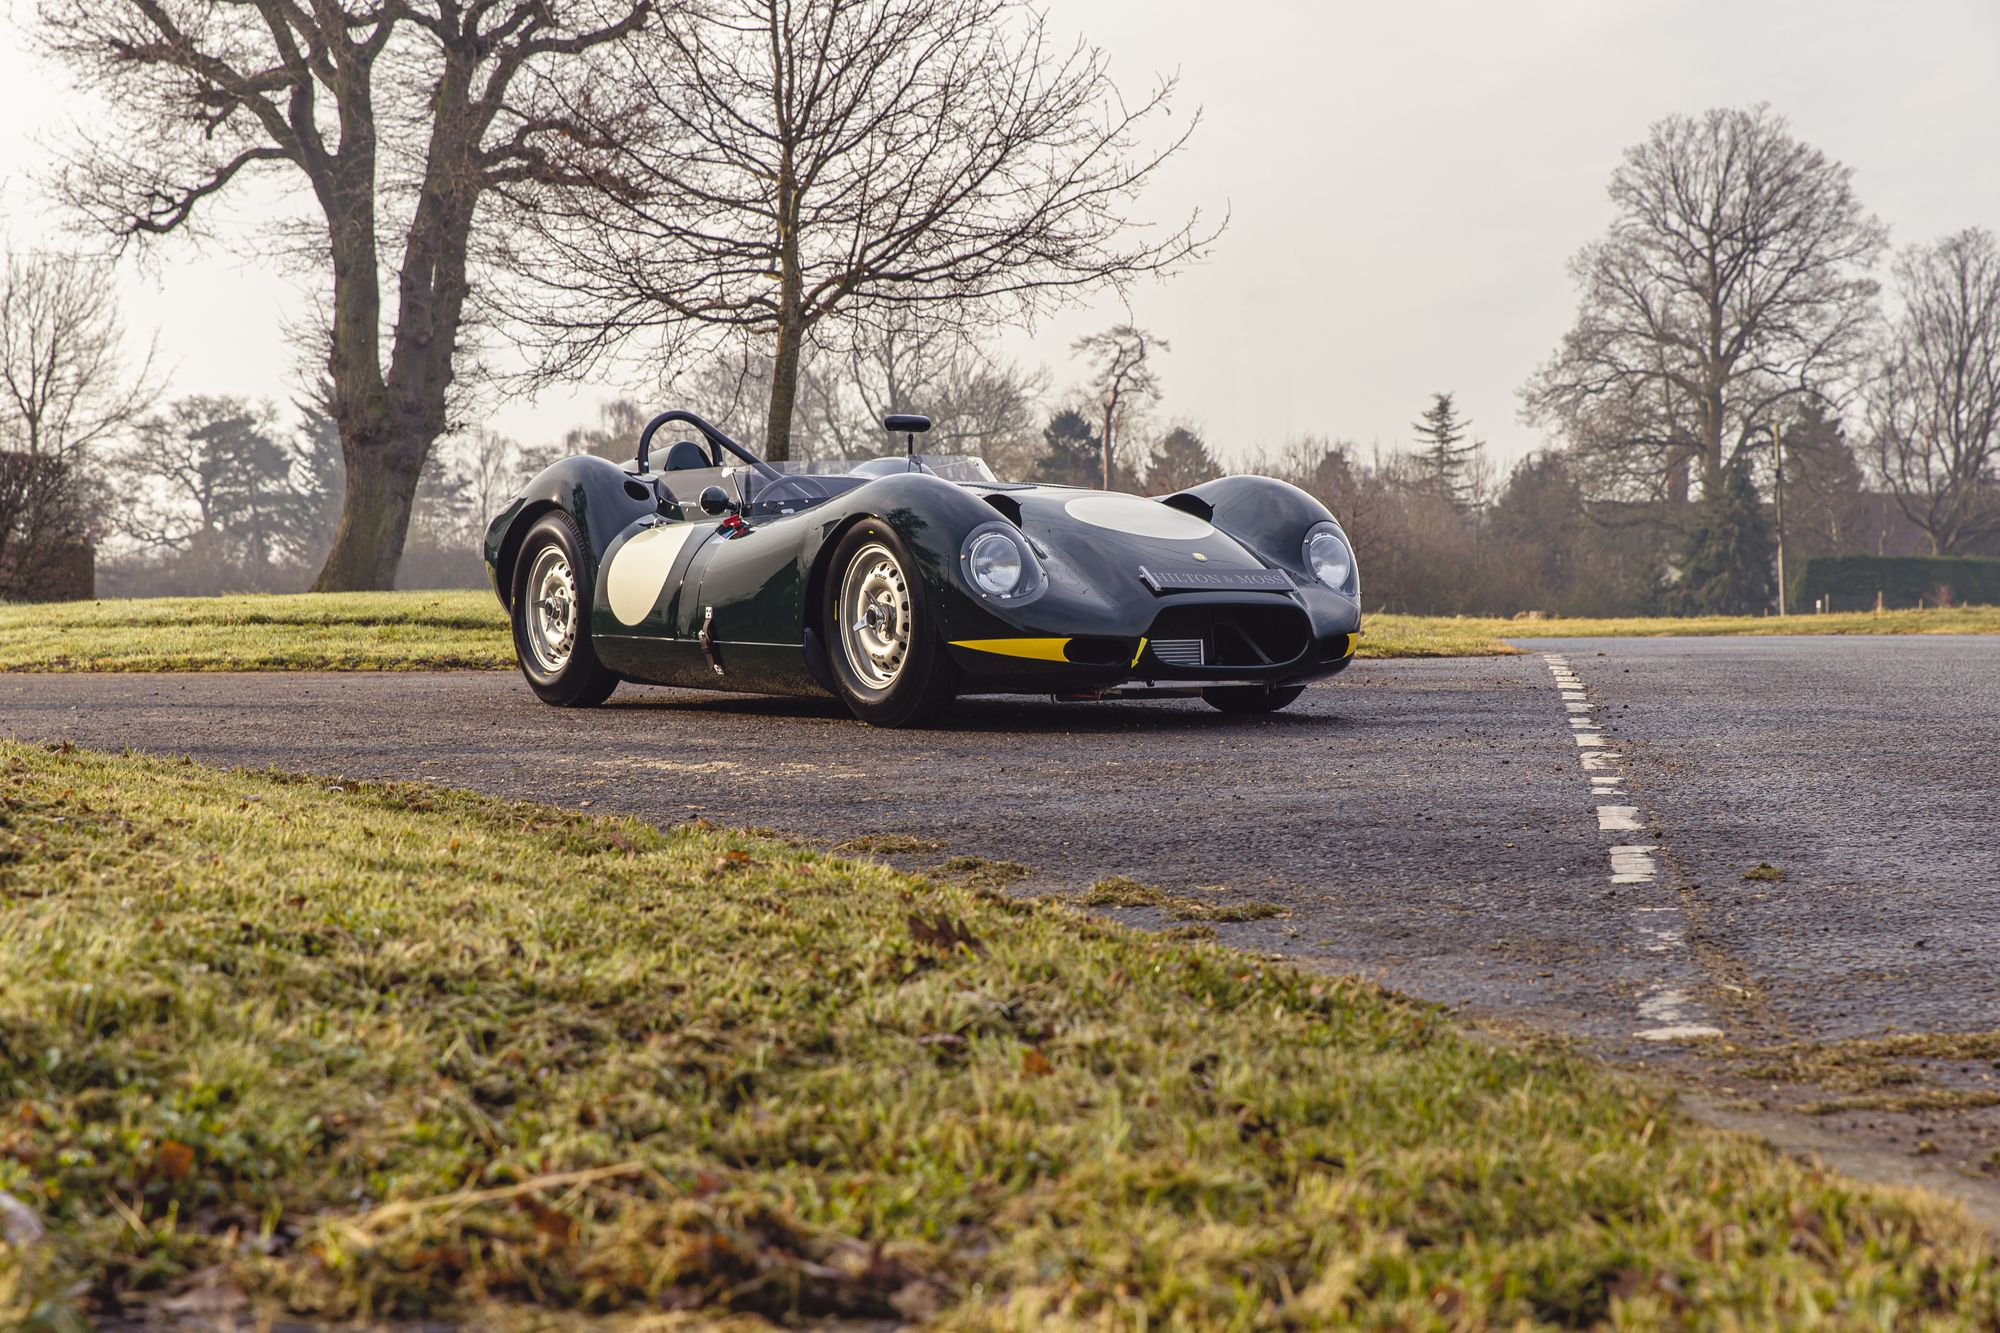 2021 Lister Knobbly 'Factory Continuation'